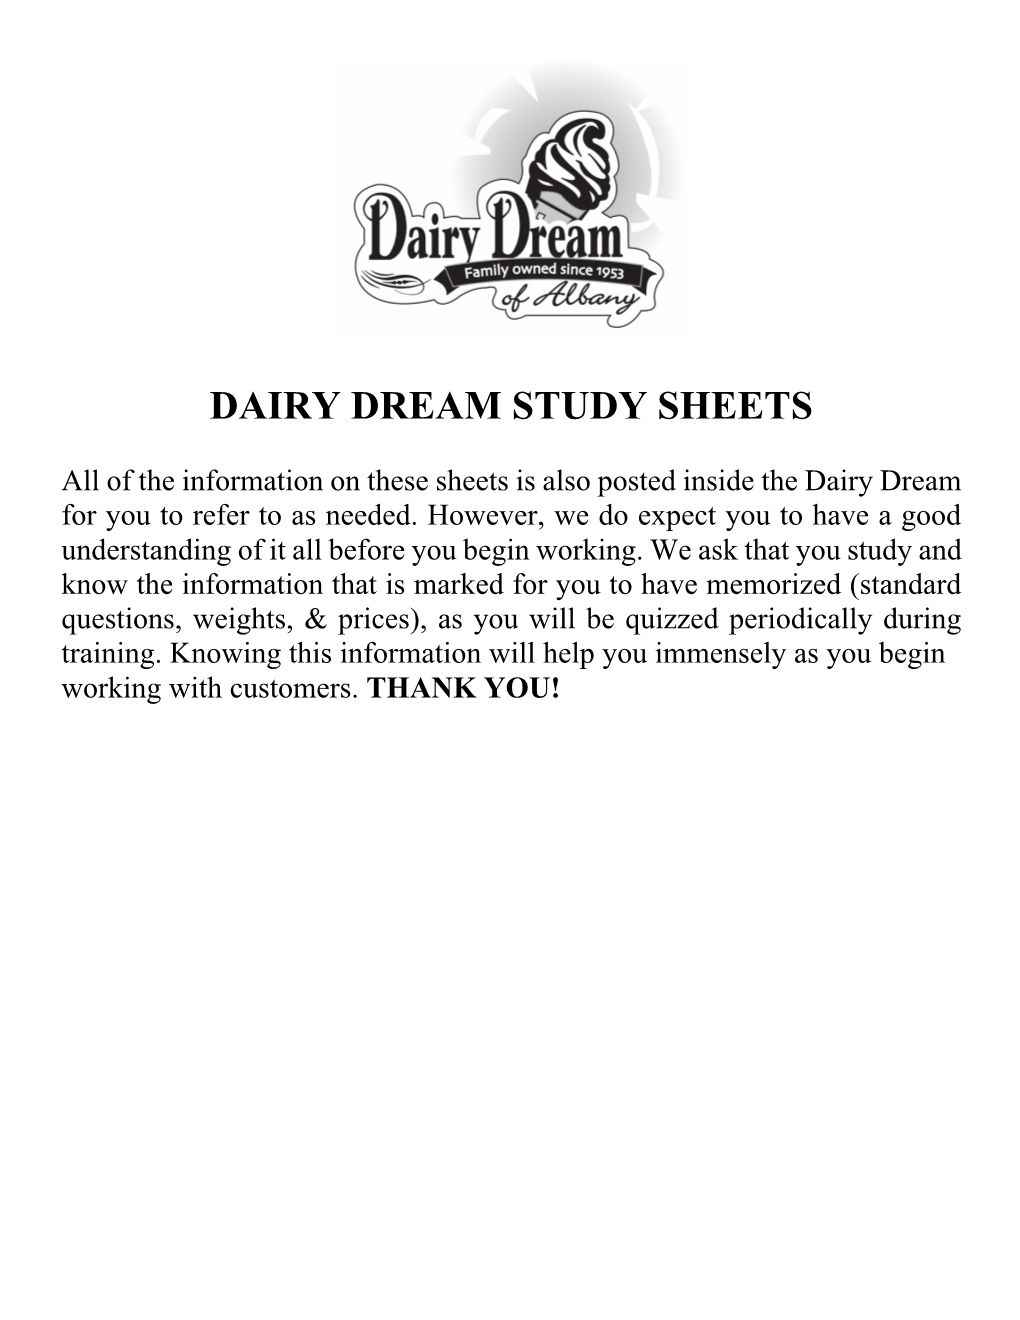 Dairy Dream Study Sheets